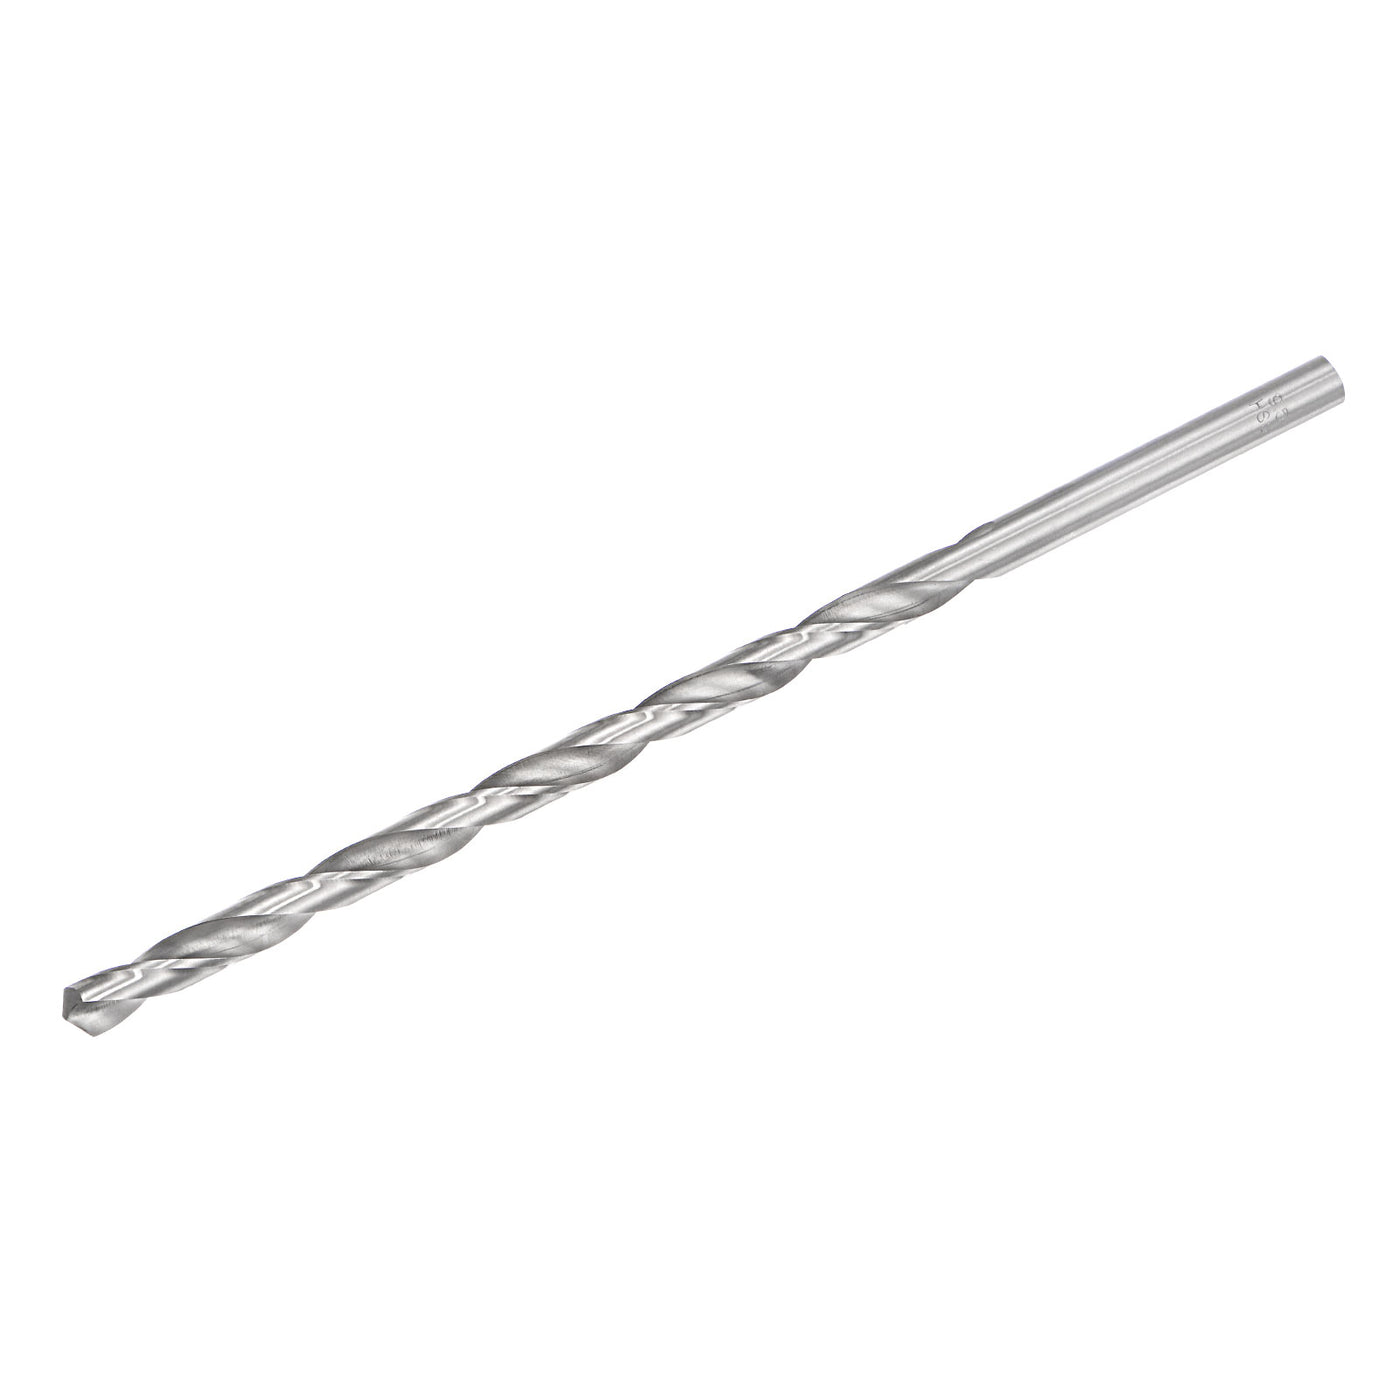 uxcell Uxcell 9.5mm Twist Drill Bits, High-Speed Steel Extra Long Drill Bit 250mm Length